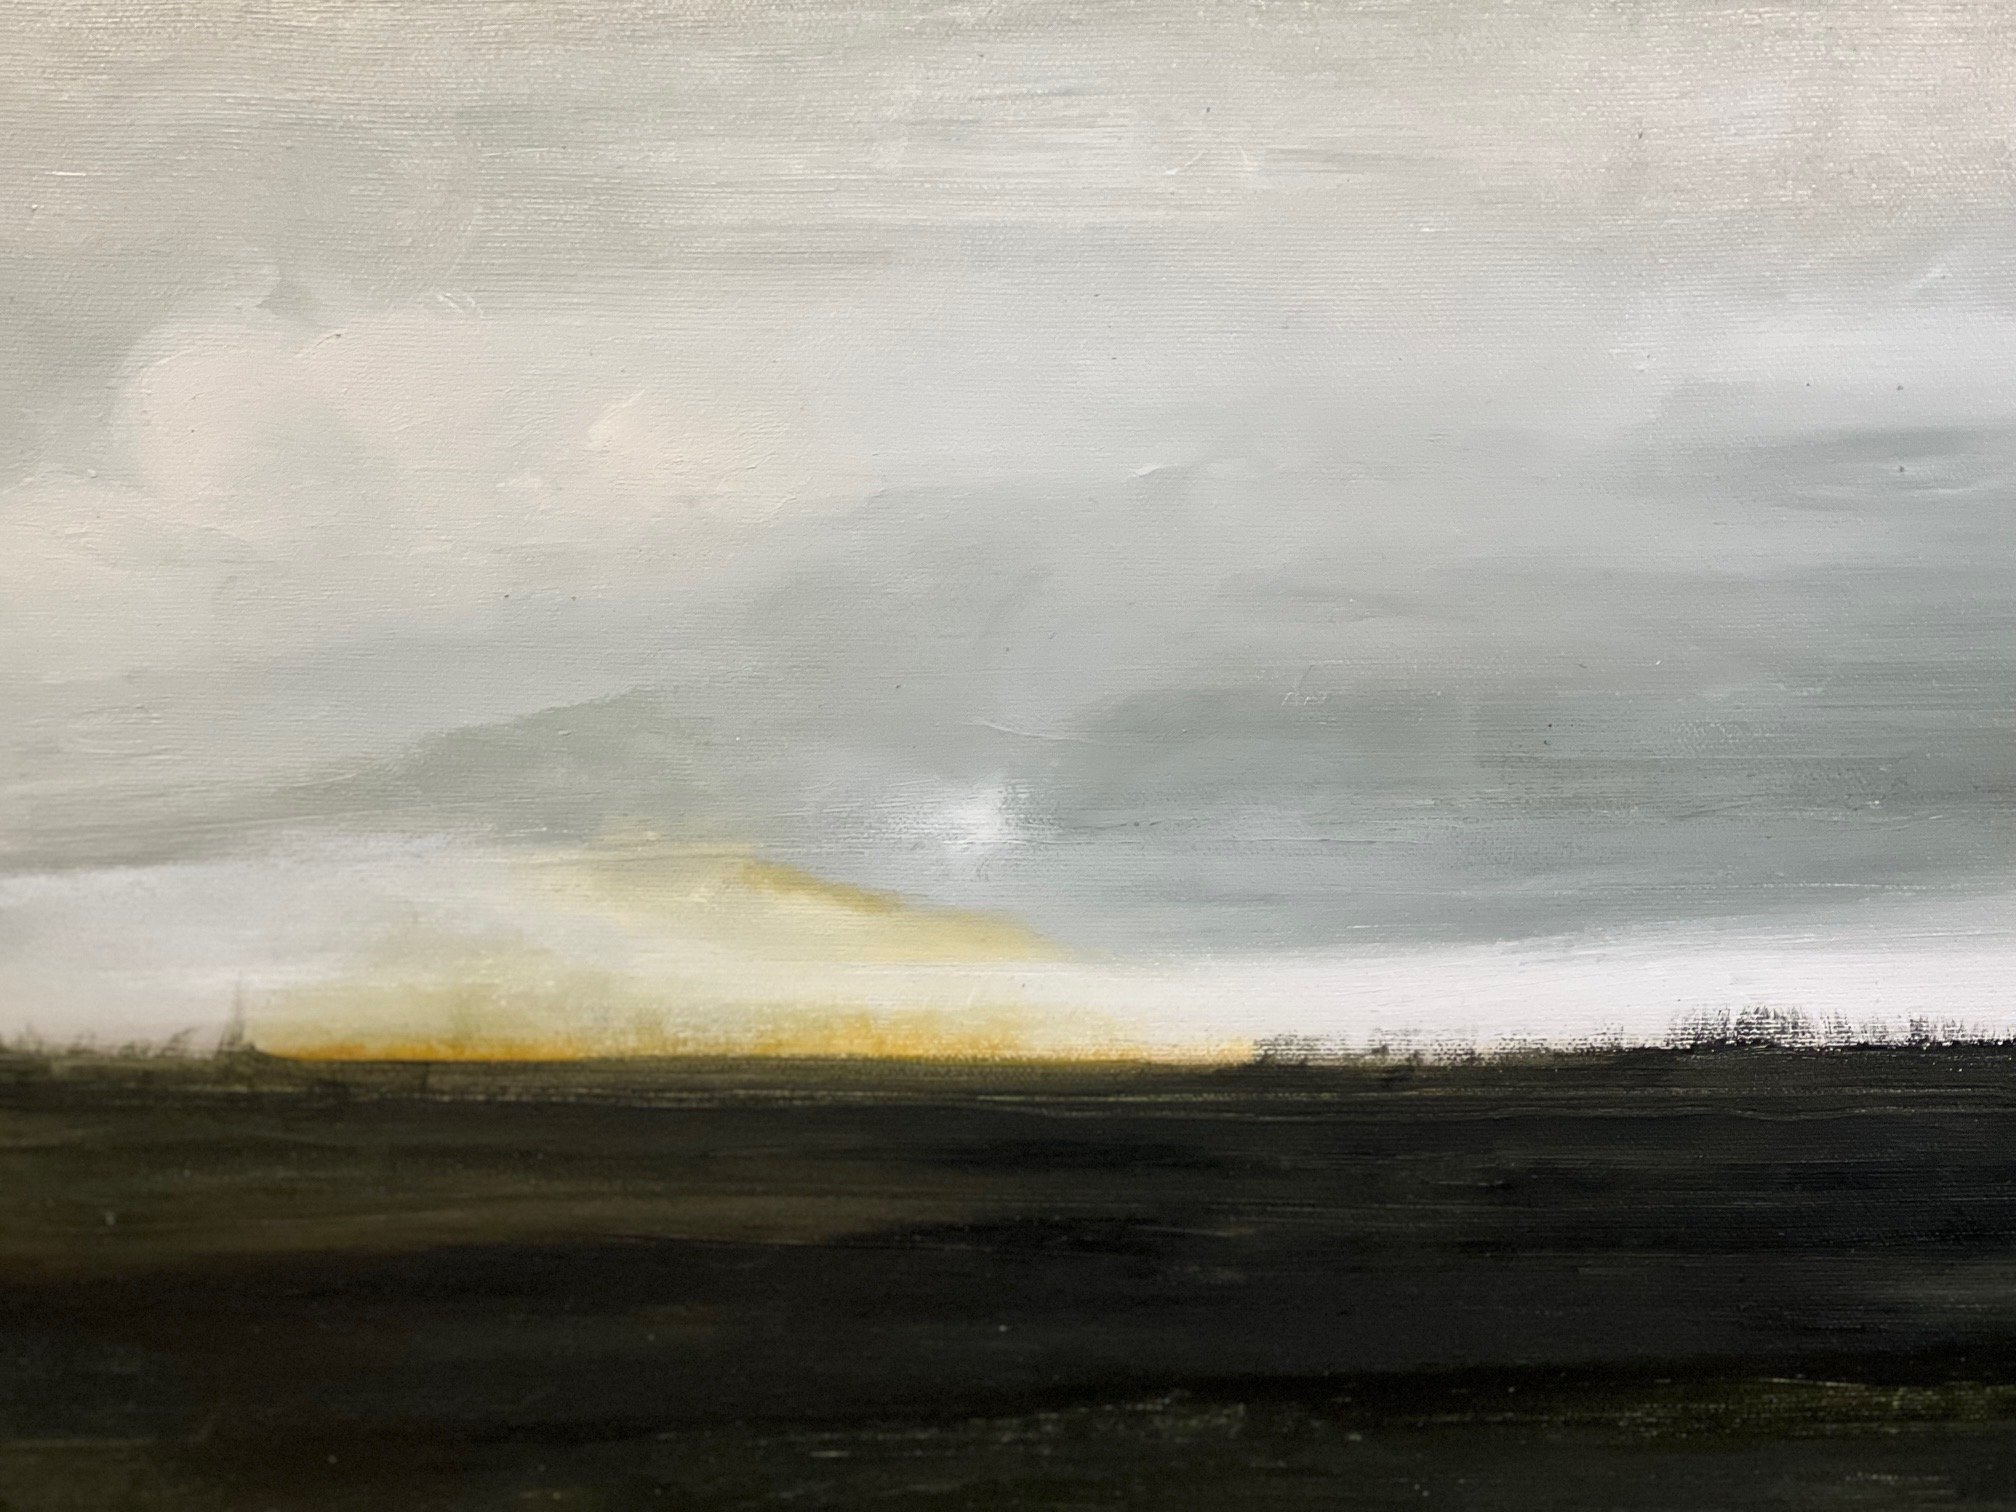 Beth O’Donnell, Sunrise, Oil on canvas, 24 x 13 inches, $1200